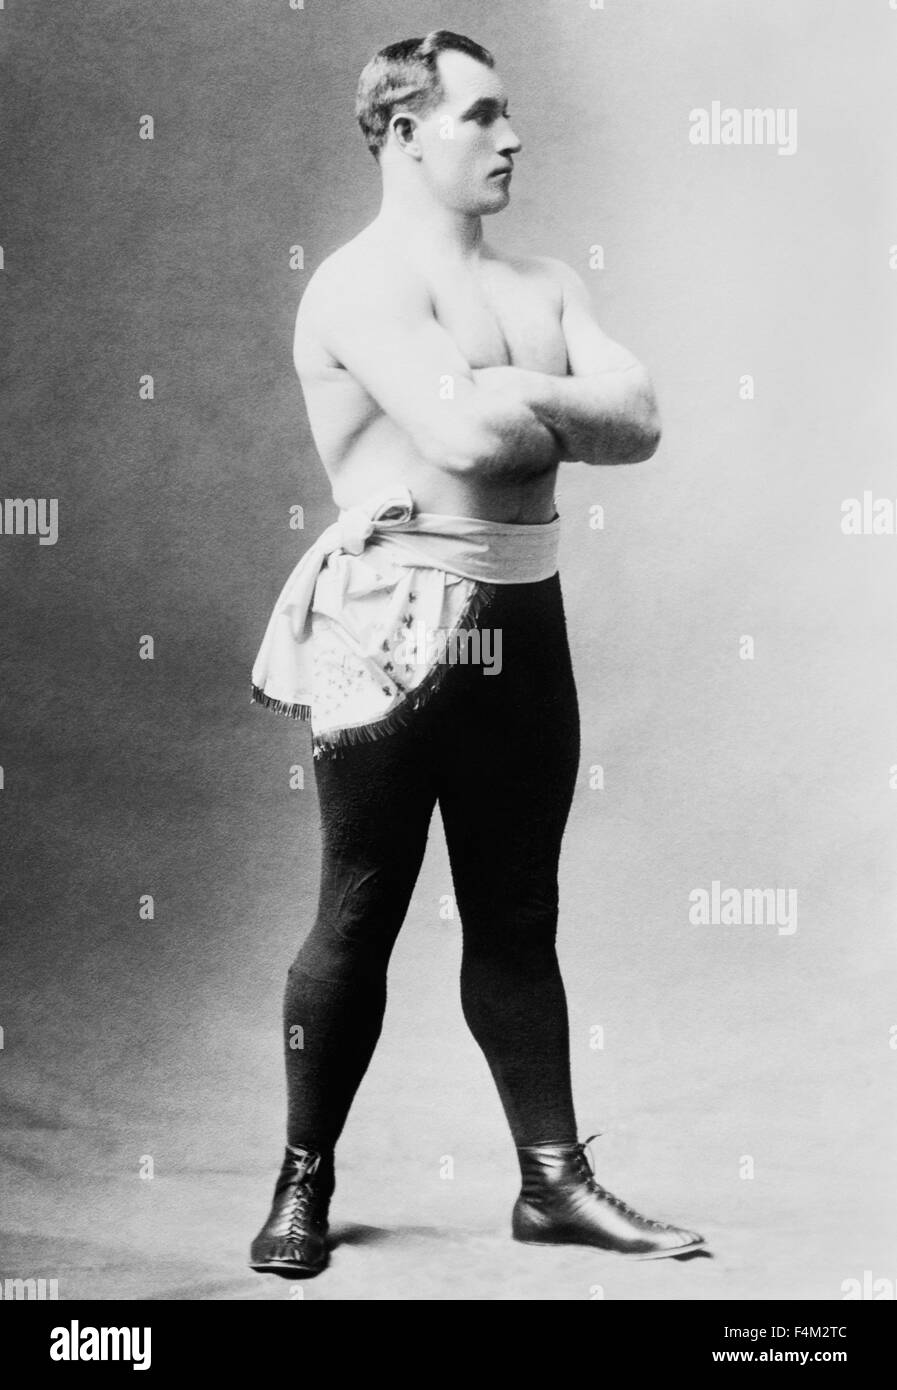 Vintage portrait photo of heavyweight boxer 'Sailor' Tom Sharkey (1873 - 1953). Sharkey, born in Dundalk, Ireland, ran away from home at a young age and went to sea as a cabin boy, eventually arriving in New York City in 1892 and joining the US Navy. He began his boxing career after being deployed to Hawaii and went on to have more than 50 bouts - fighting some of the great champions of the era including Jim Corbett, Bob Fitzsimmons and Jim Jeffries. Despite never winning the world heavyweight crown Sharkey is generally regarded as one of the great fighters of his time. Stock Photo